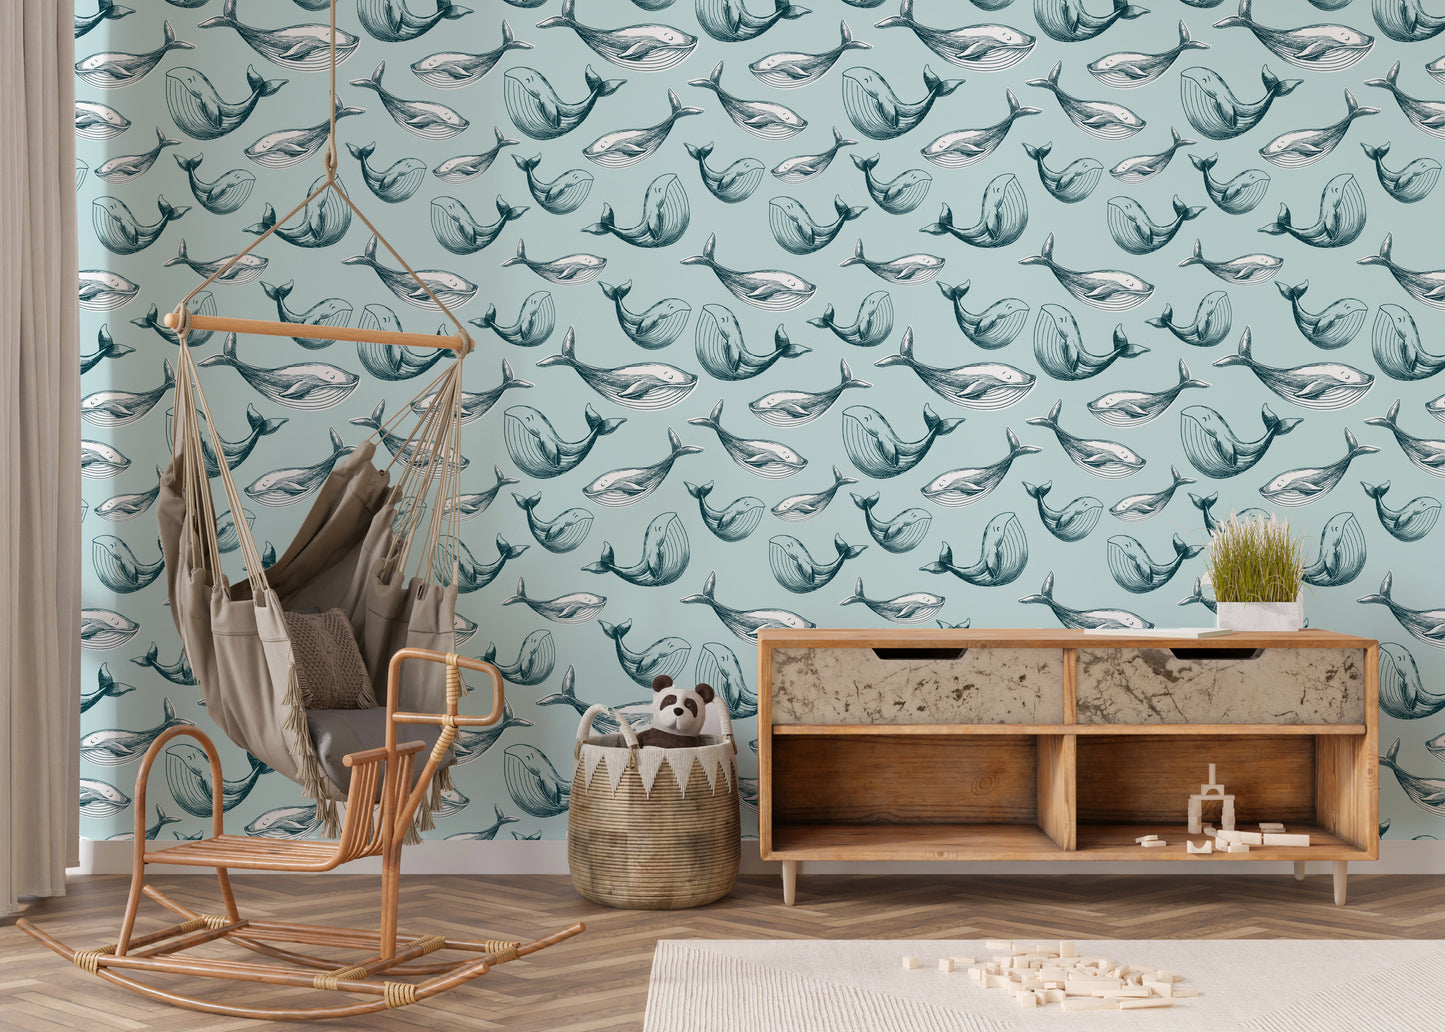 Whale removable peel and stick wallpaper Nautical wallpaper